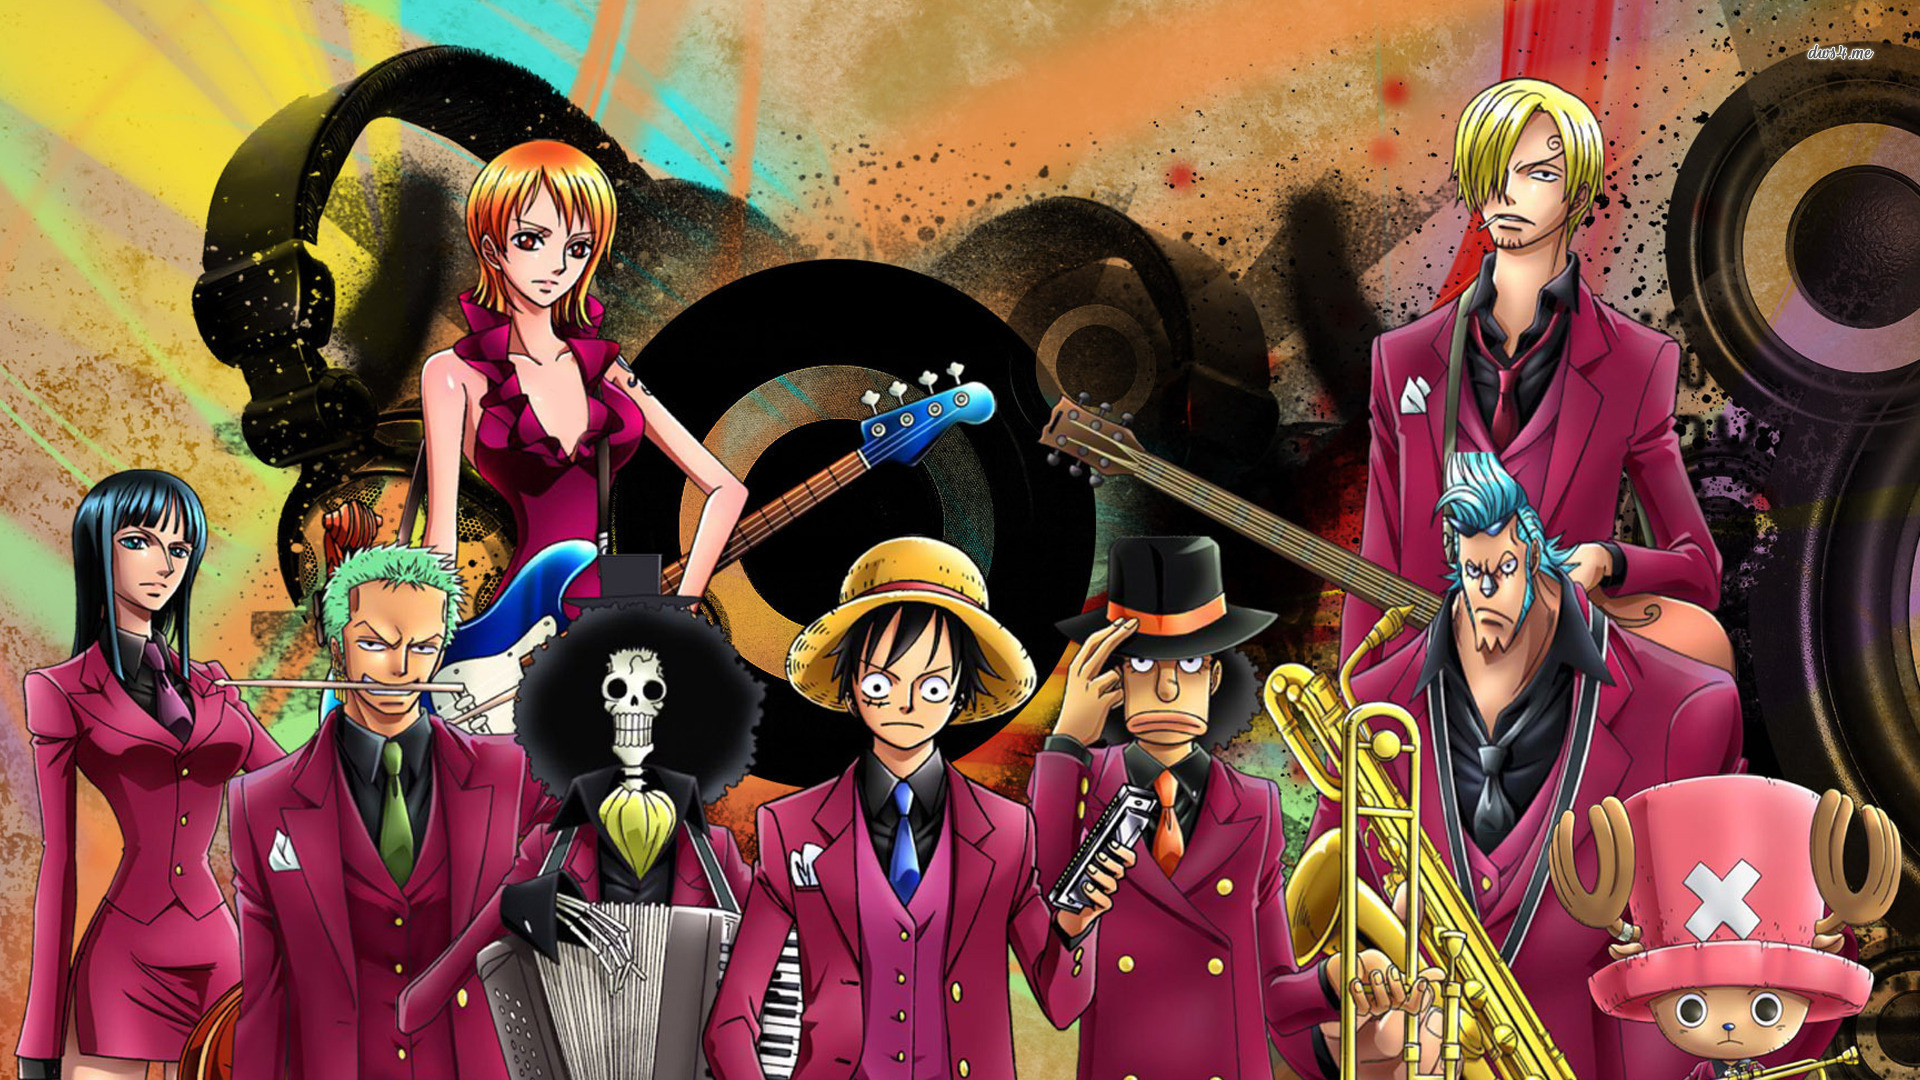 1920x1080 one piece wallpaper hd background hd 4k high definition mac apple colourful  images backgrounds download wallpaper free 1920Ã1080 Wallpaper HD